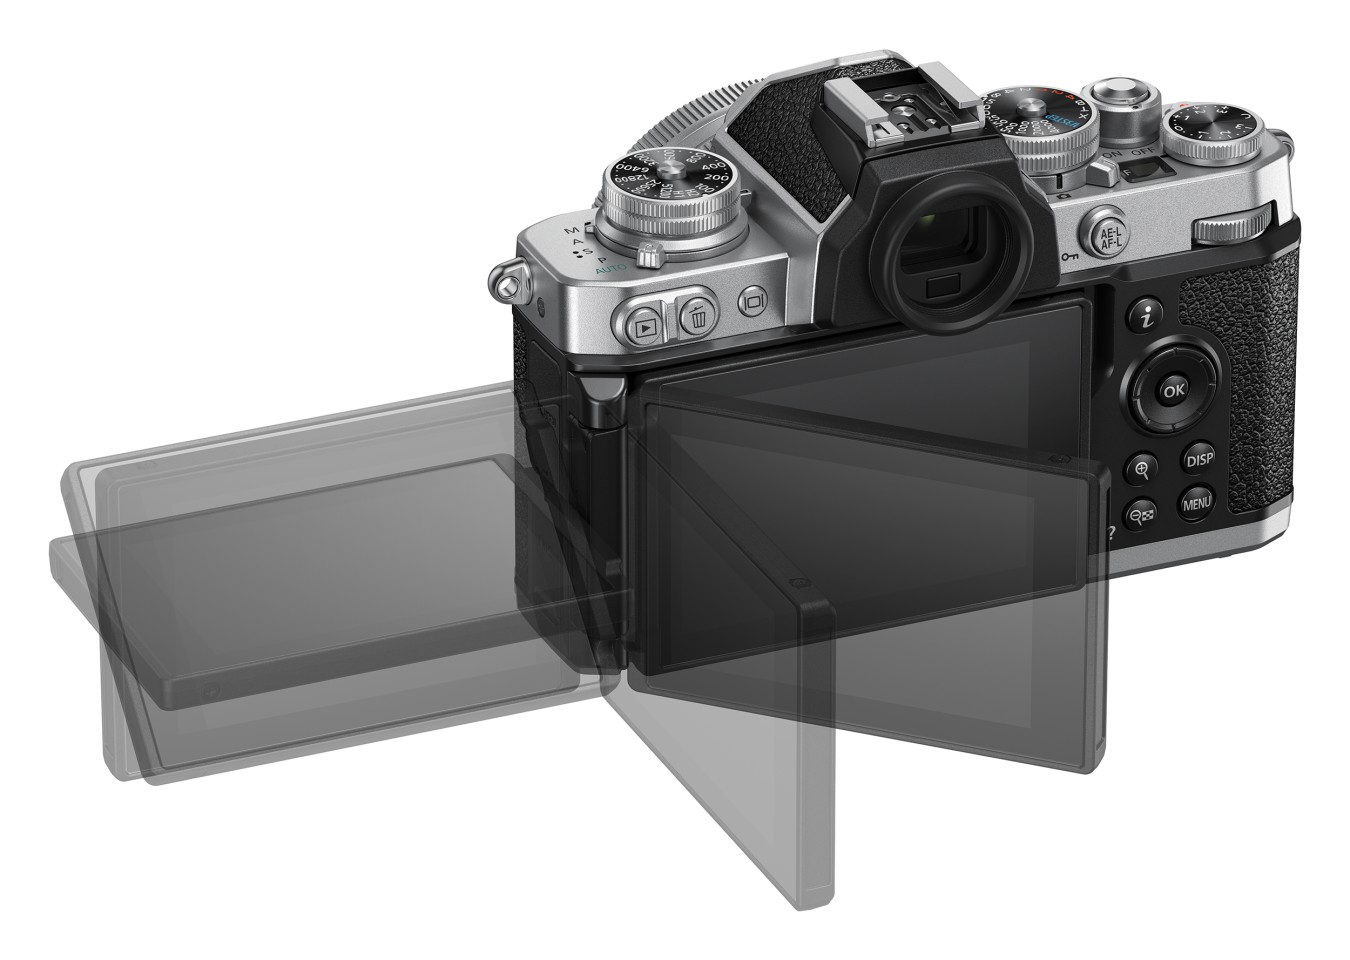 The Z fc features a vari-angle LCD touch panel below the electronic viewfinder